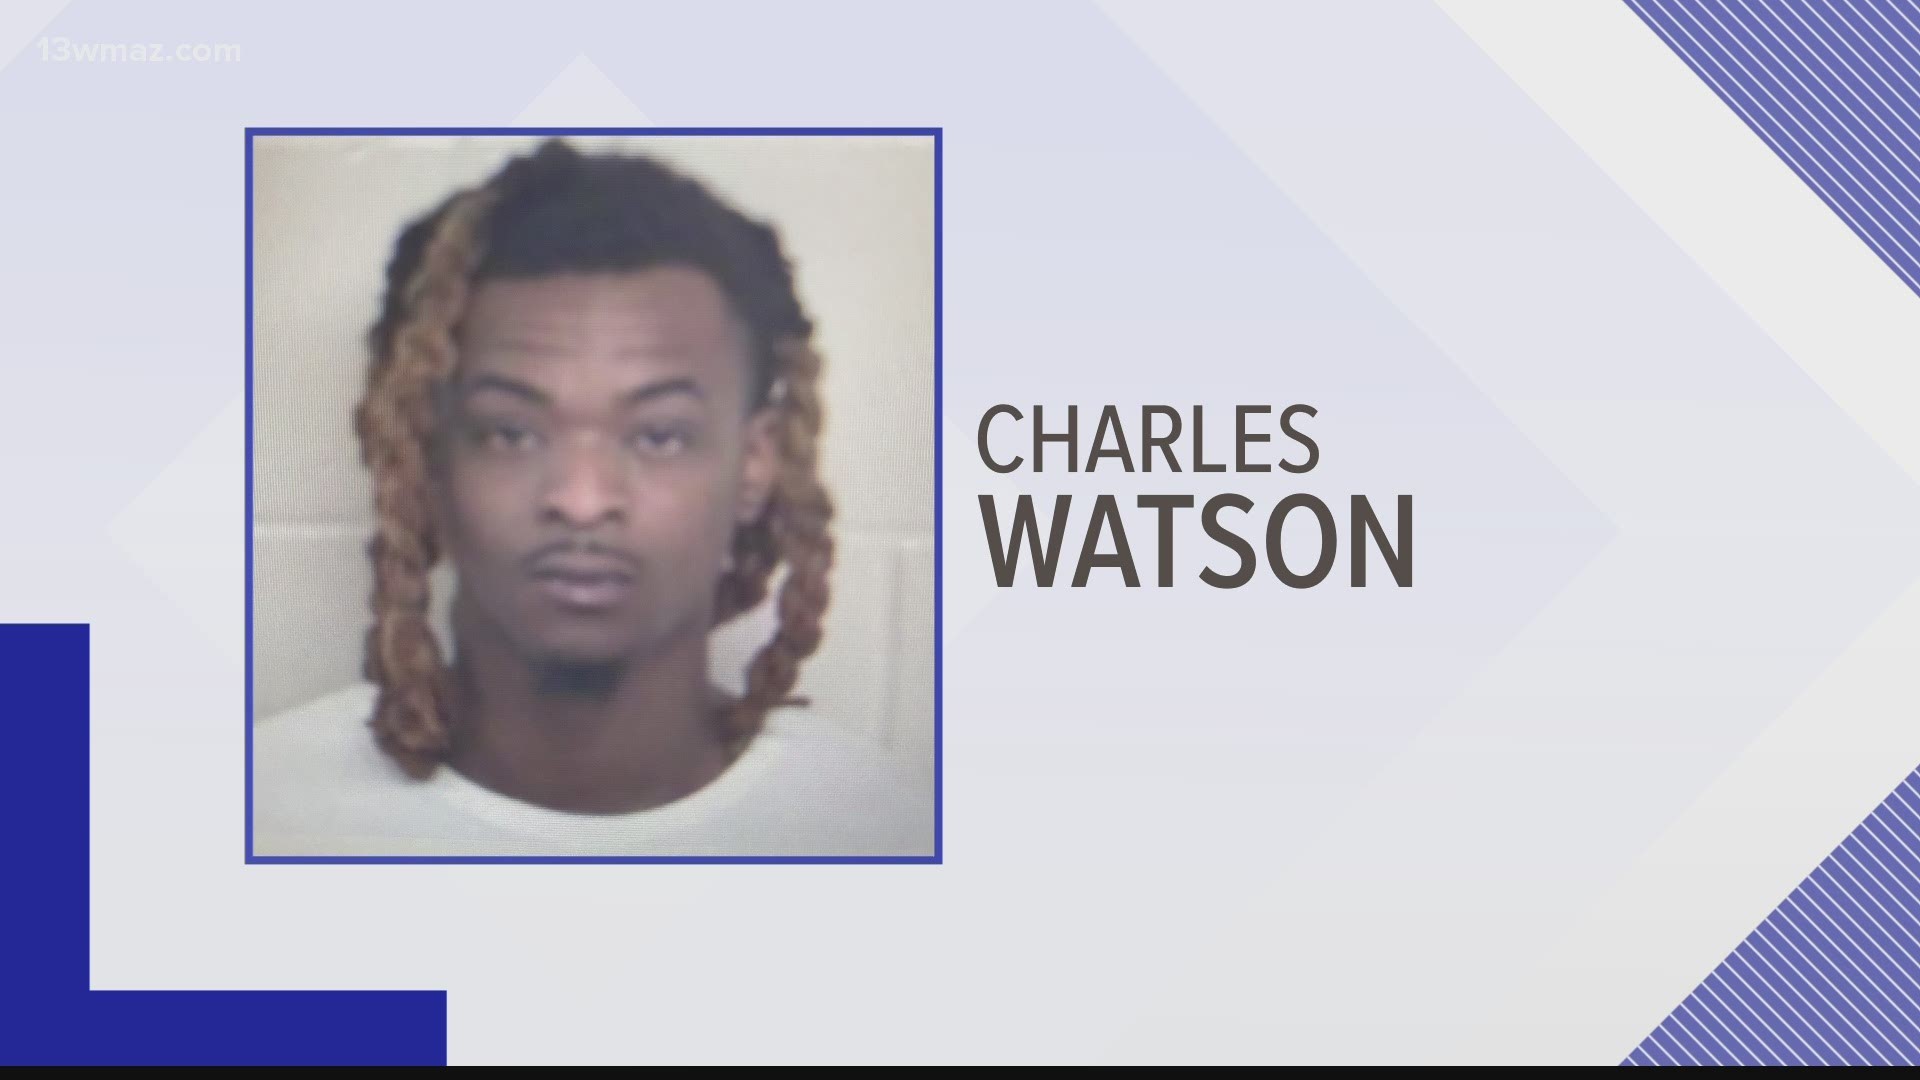 According to Sheriff Joel Cochran, 29-year-old Charles Watson is the sixth person arrested Wednesday. He is charged with Aggravated Assault.